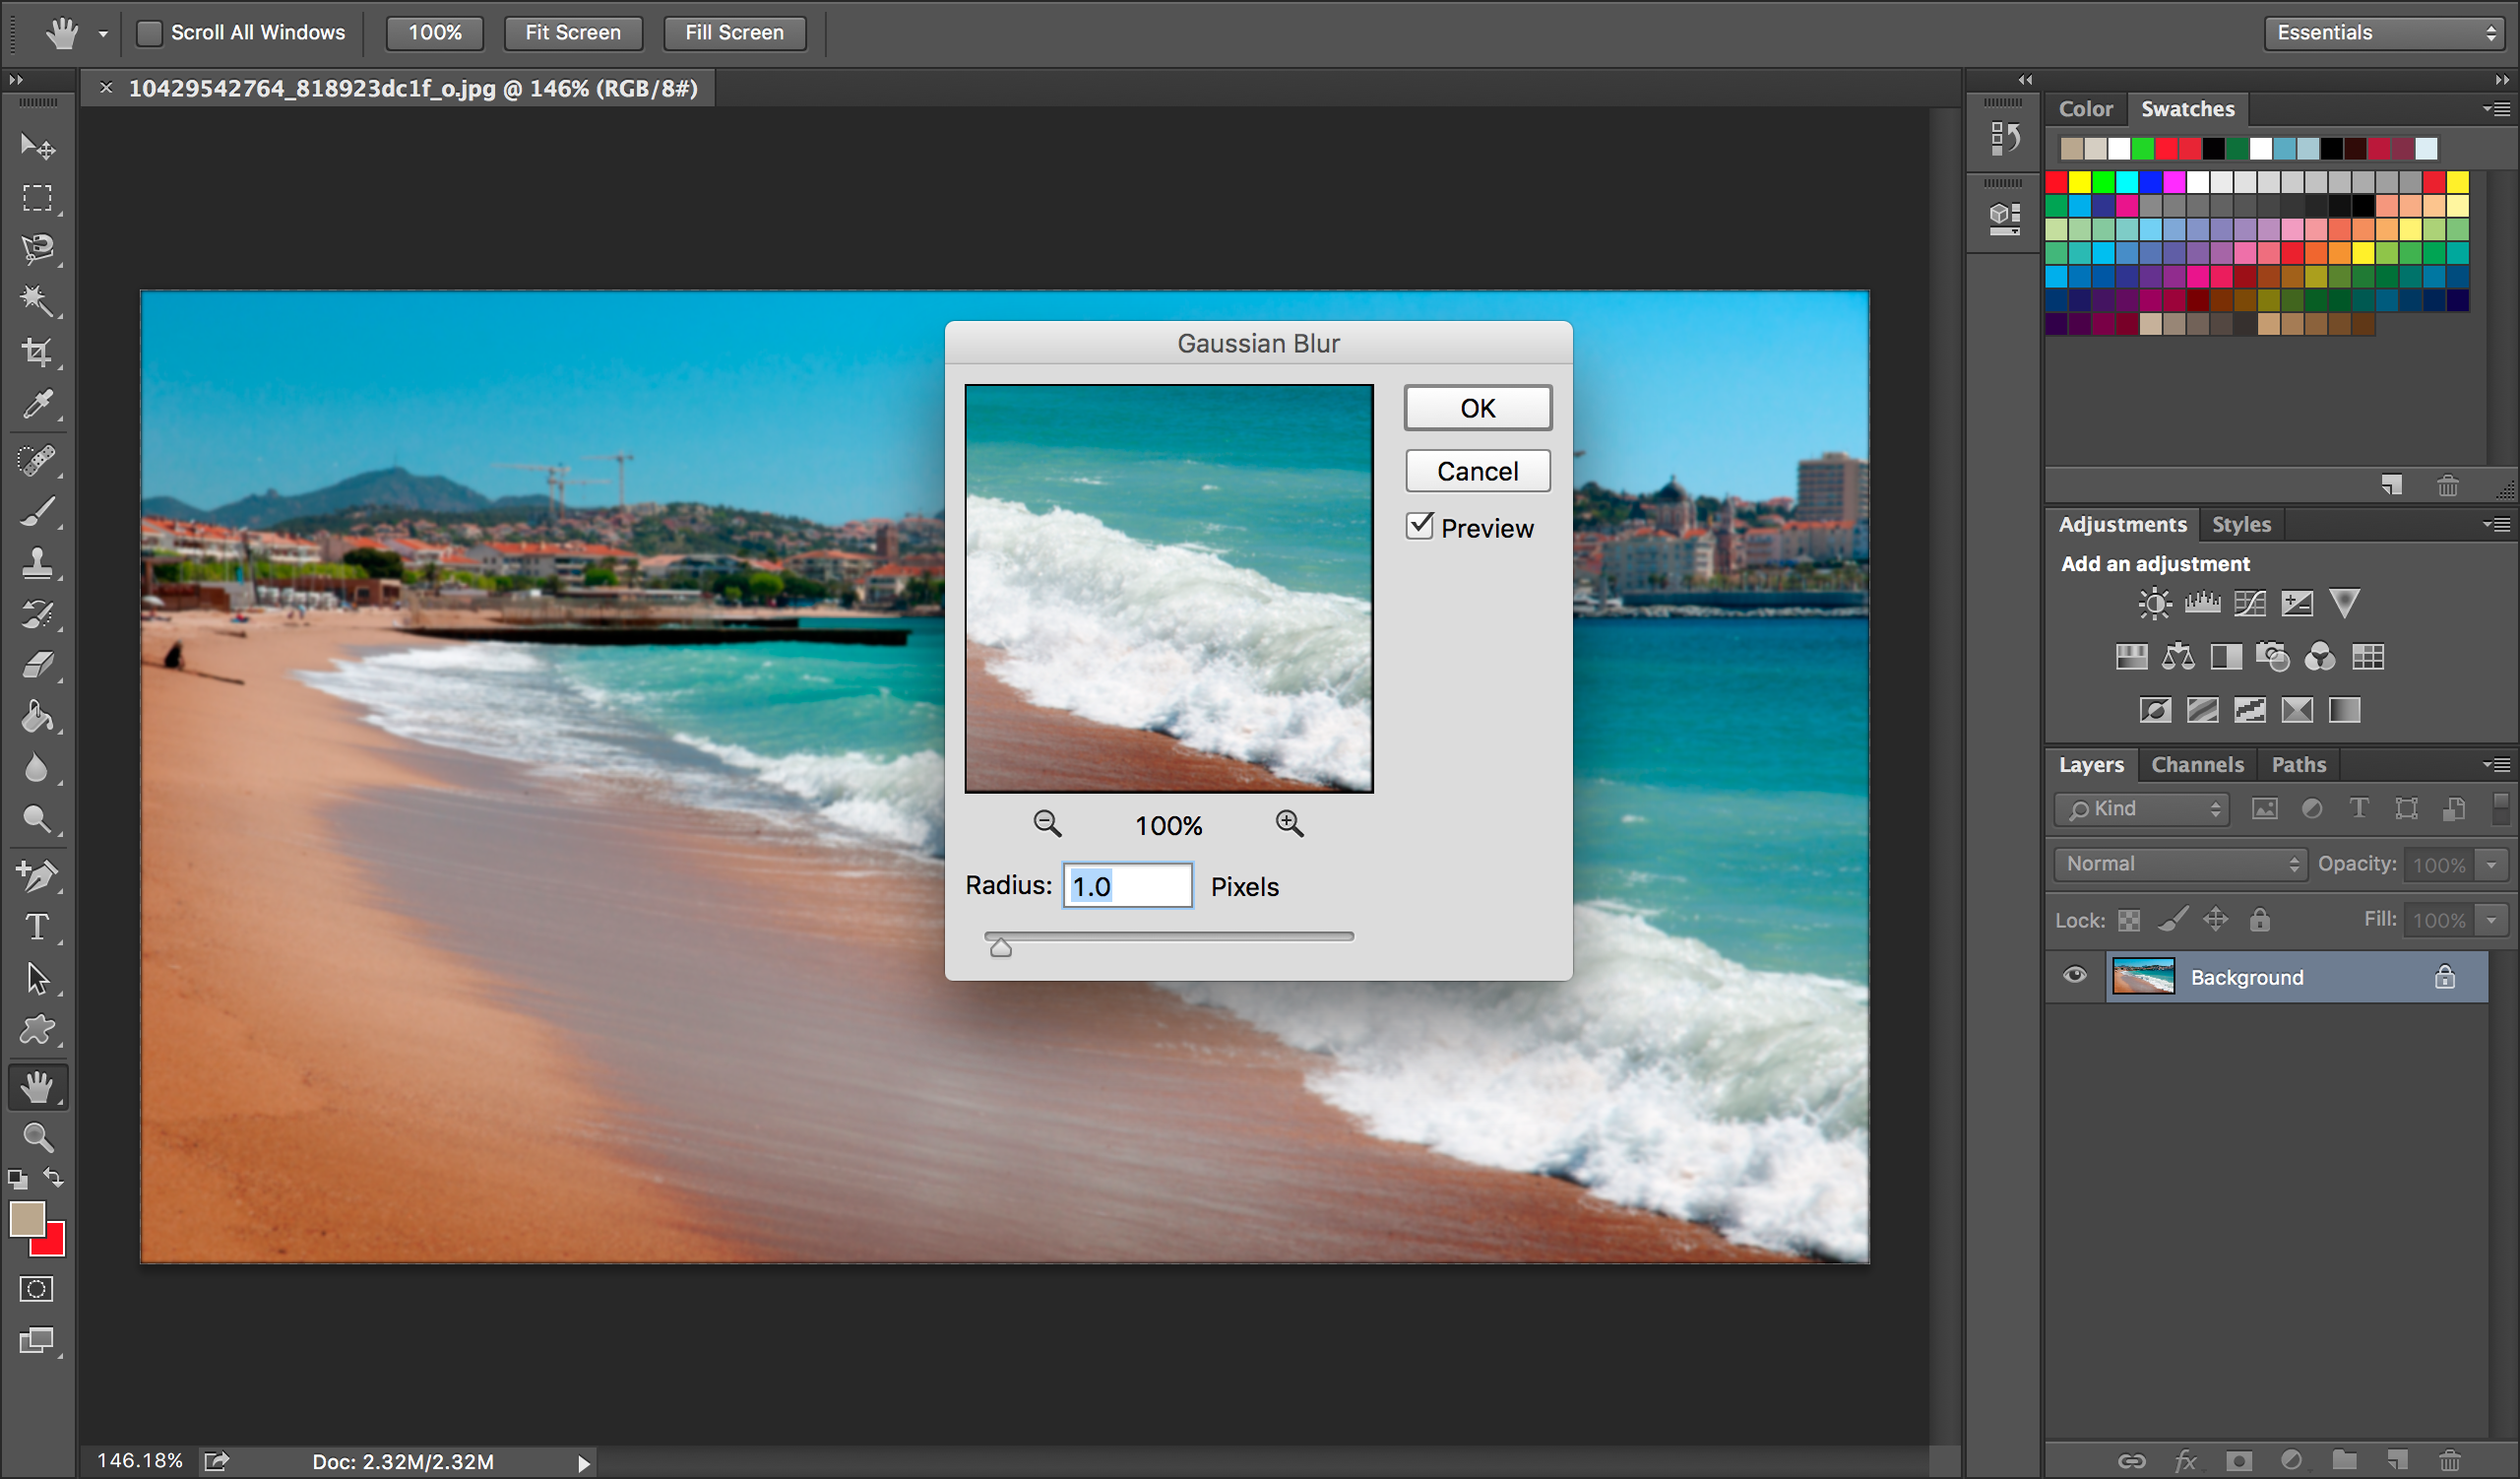 Photoshop screenshot - building a PC for photo editing and graphic design